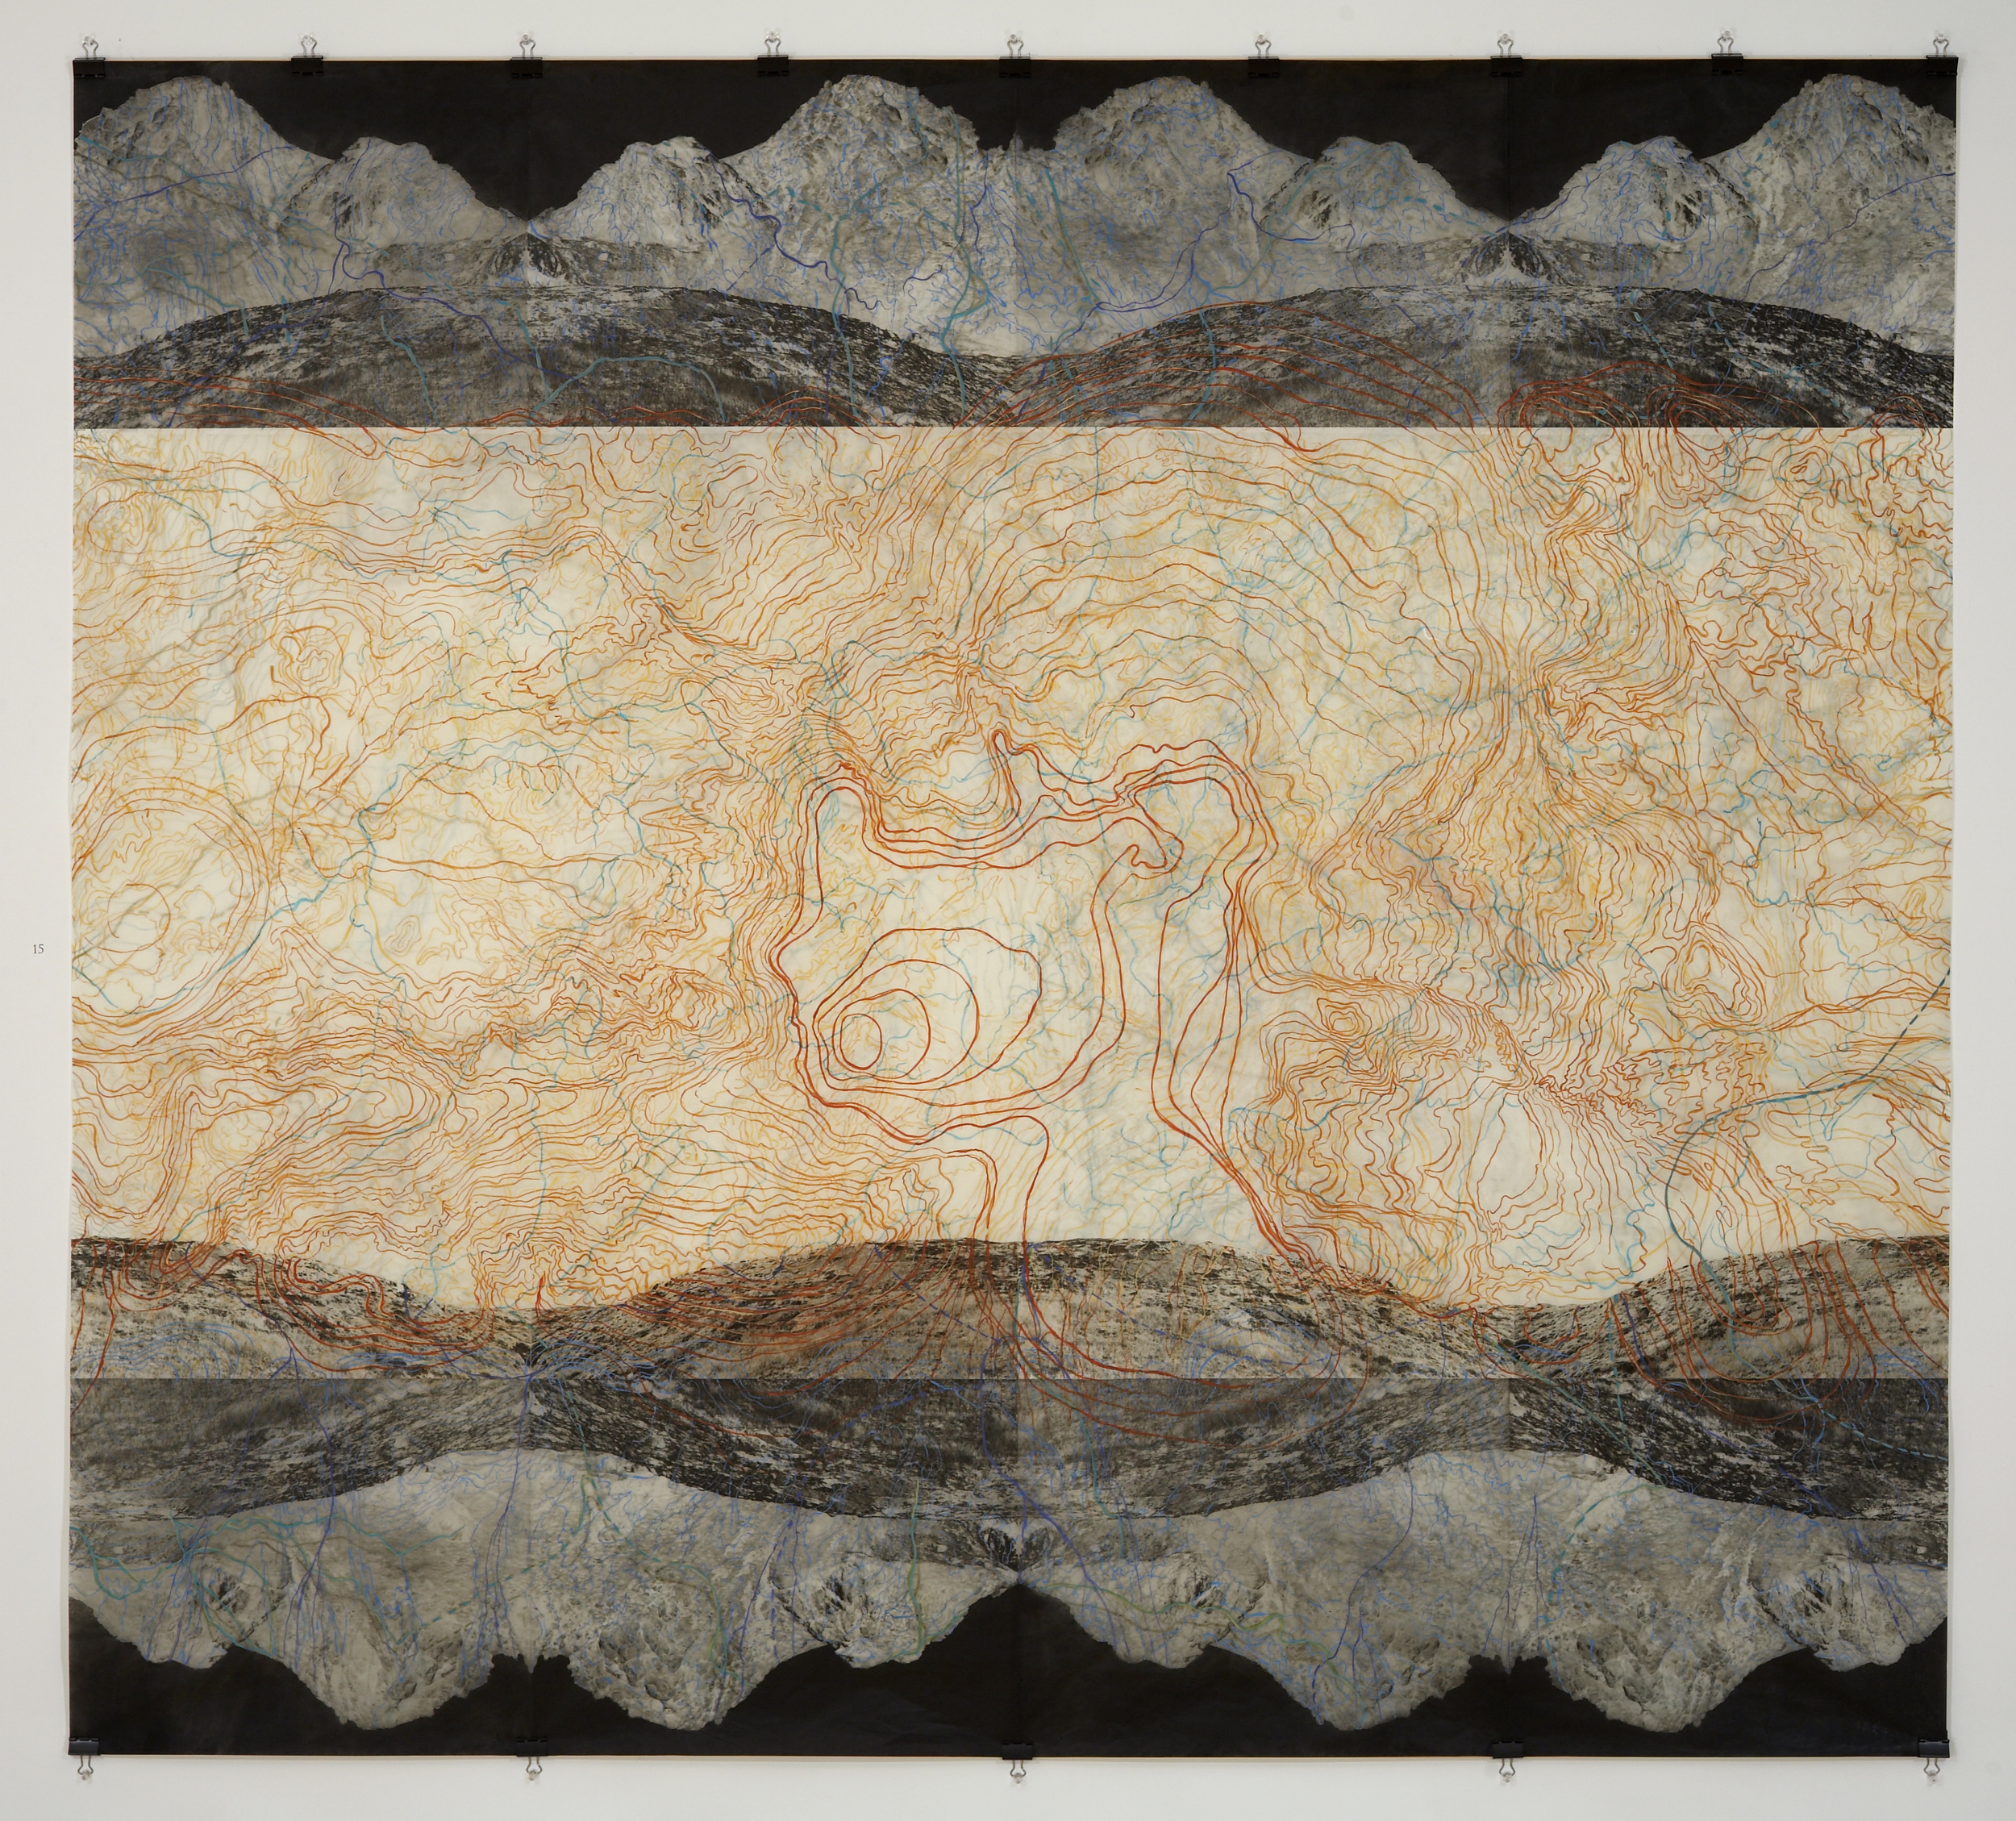    Geothermal Topography&nbsp;III, &nbsp;2007   Photogravure on kozo shi, digital pigment print, oil paint and wax in layers   72” X 79"  